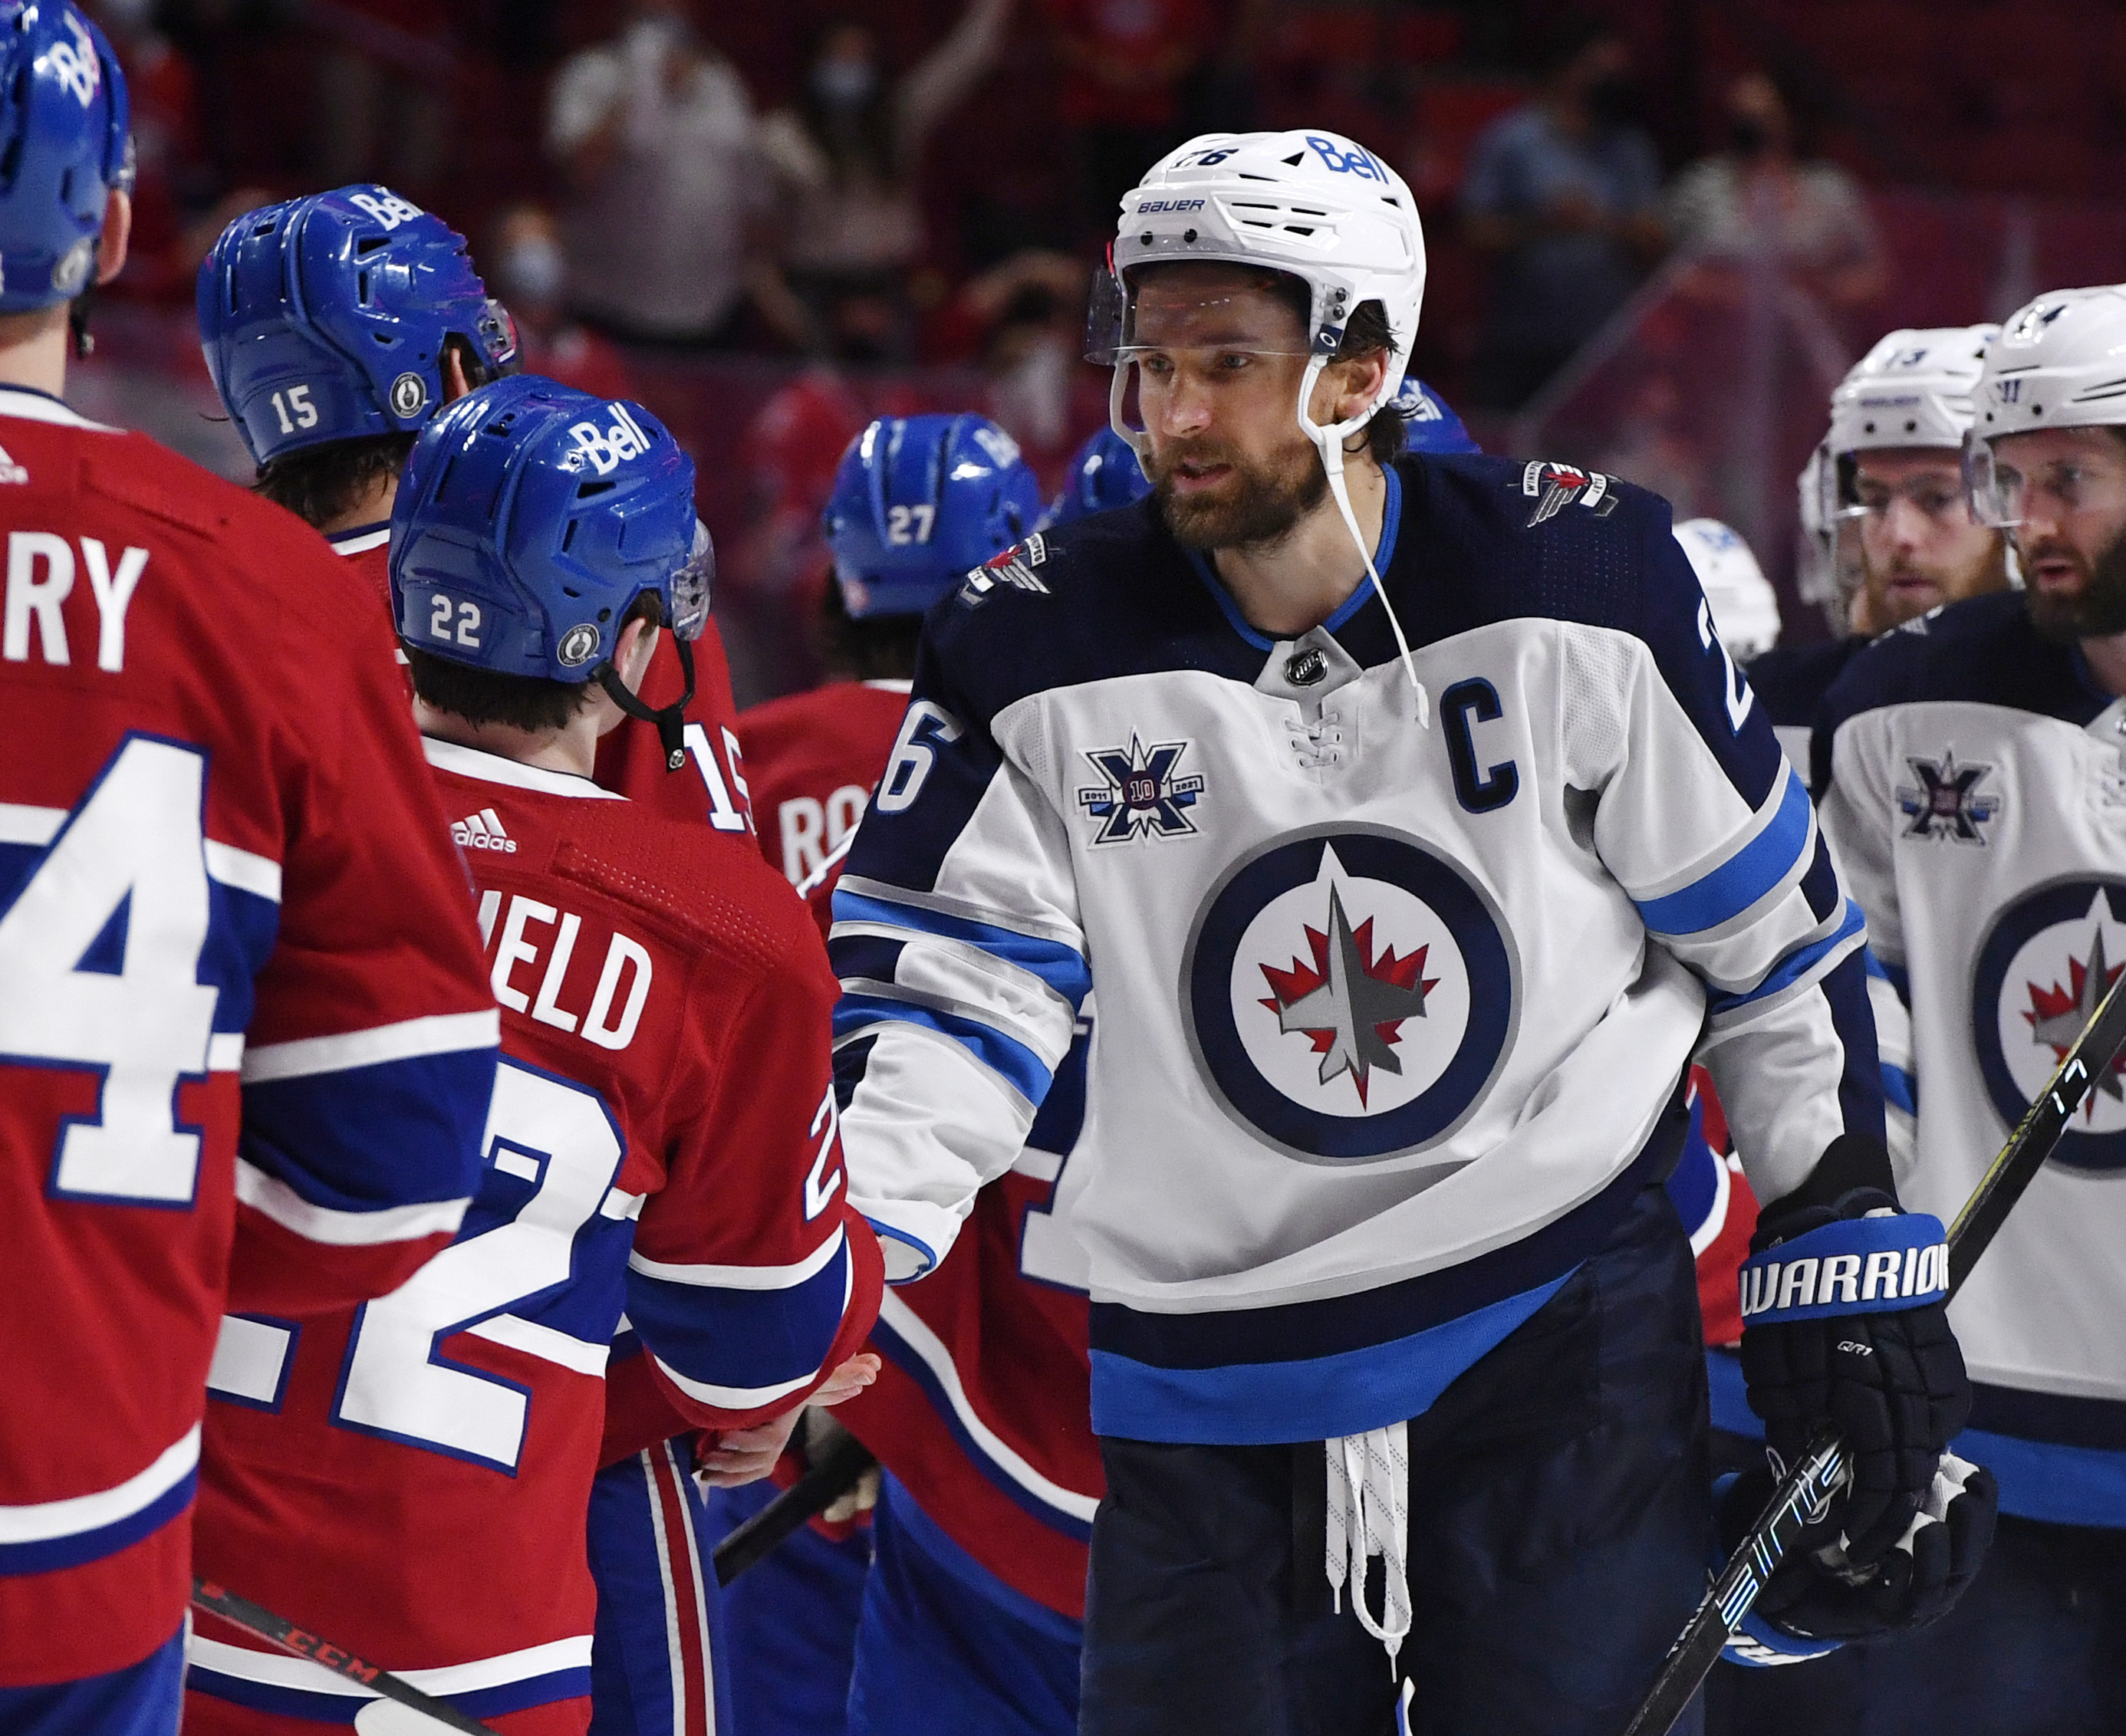 Jun 7, 2021; Montreal, Quebec, CAN; Montreal Canadiens forward Cole Caufield (22) and Winnipeg Jets forward Blake Wheeler (26) shake hands after game four of the second round of the 2021 Stanley Cup Playoffs at the Bell Centre. The Montreal Canadiens swept the series.